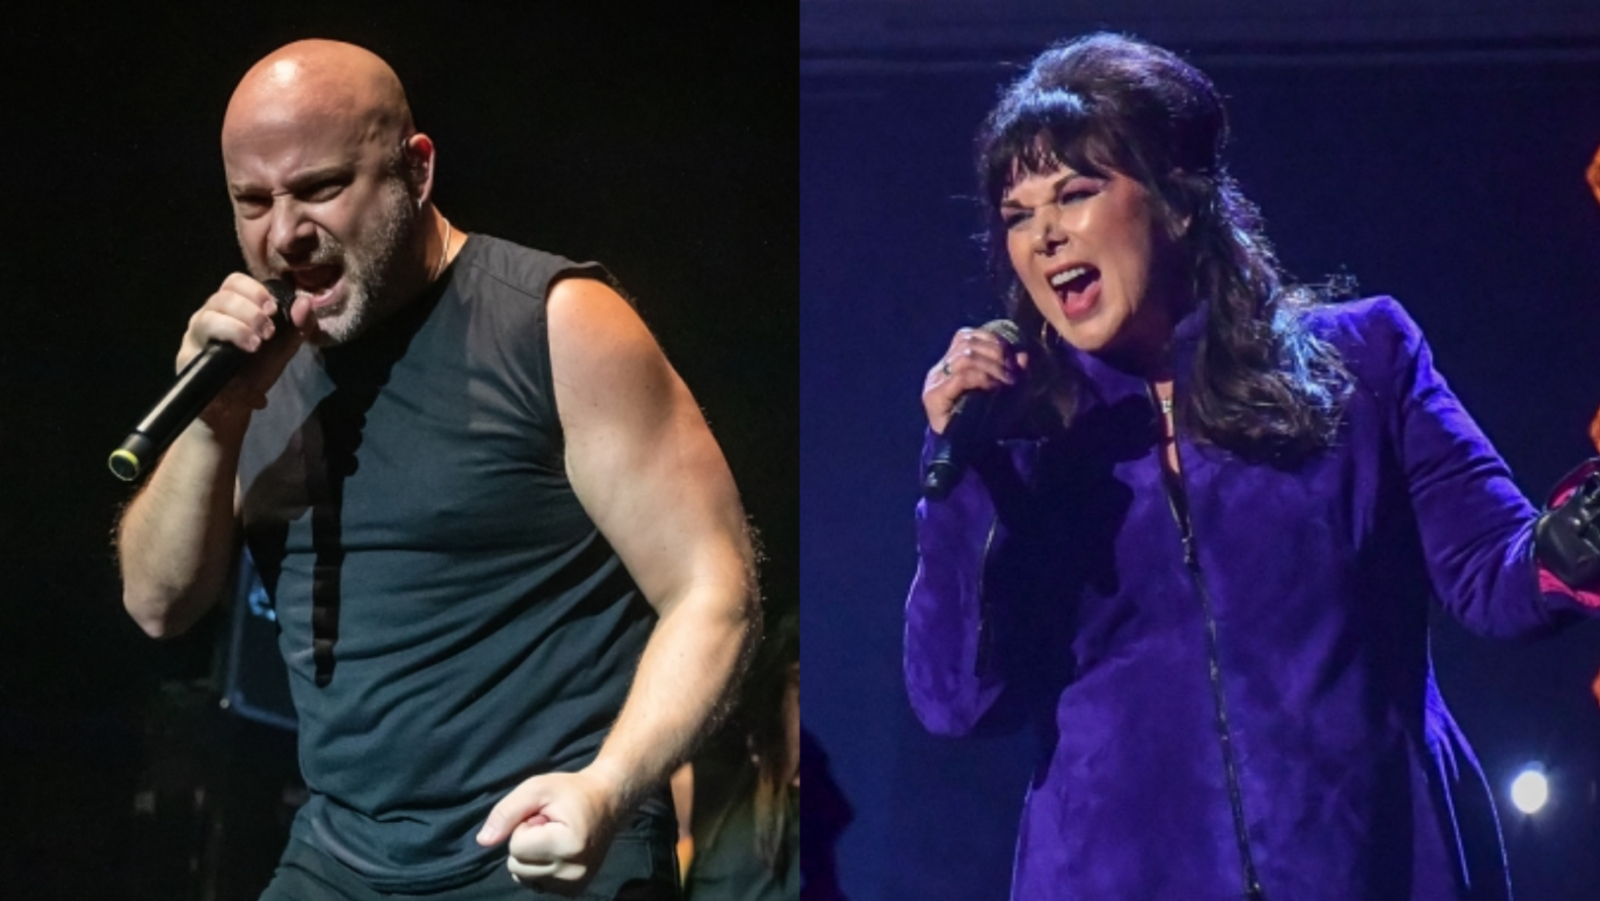 Hear Disturbed Duet With Heart's Ann Wilson on New Song "Don't Tell Me